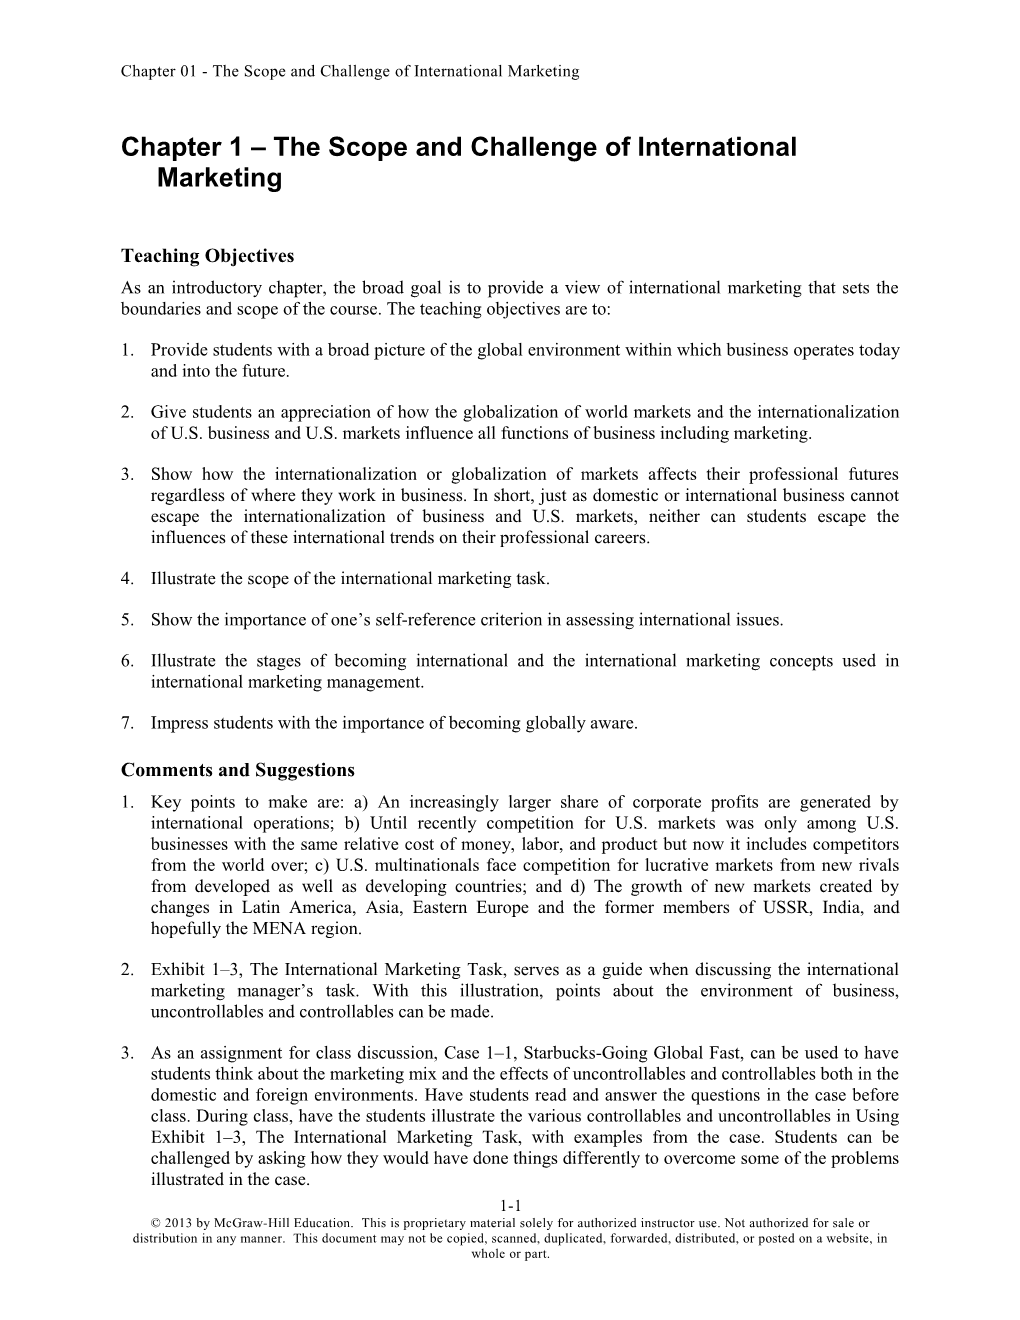 Chapter 1 the Scope and Challenge of International Marketing